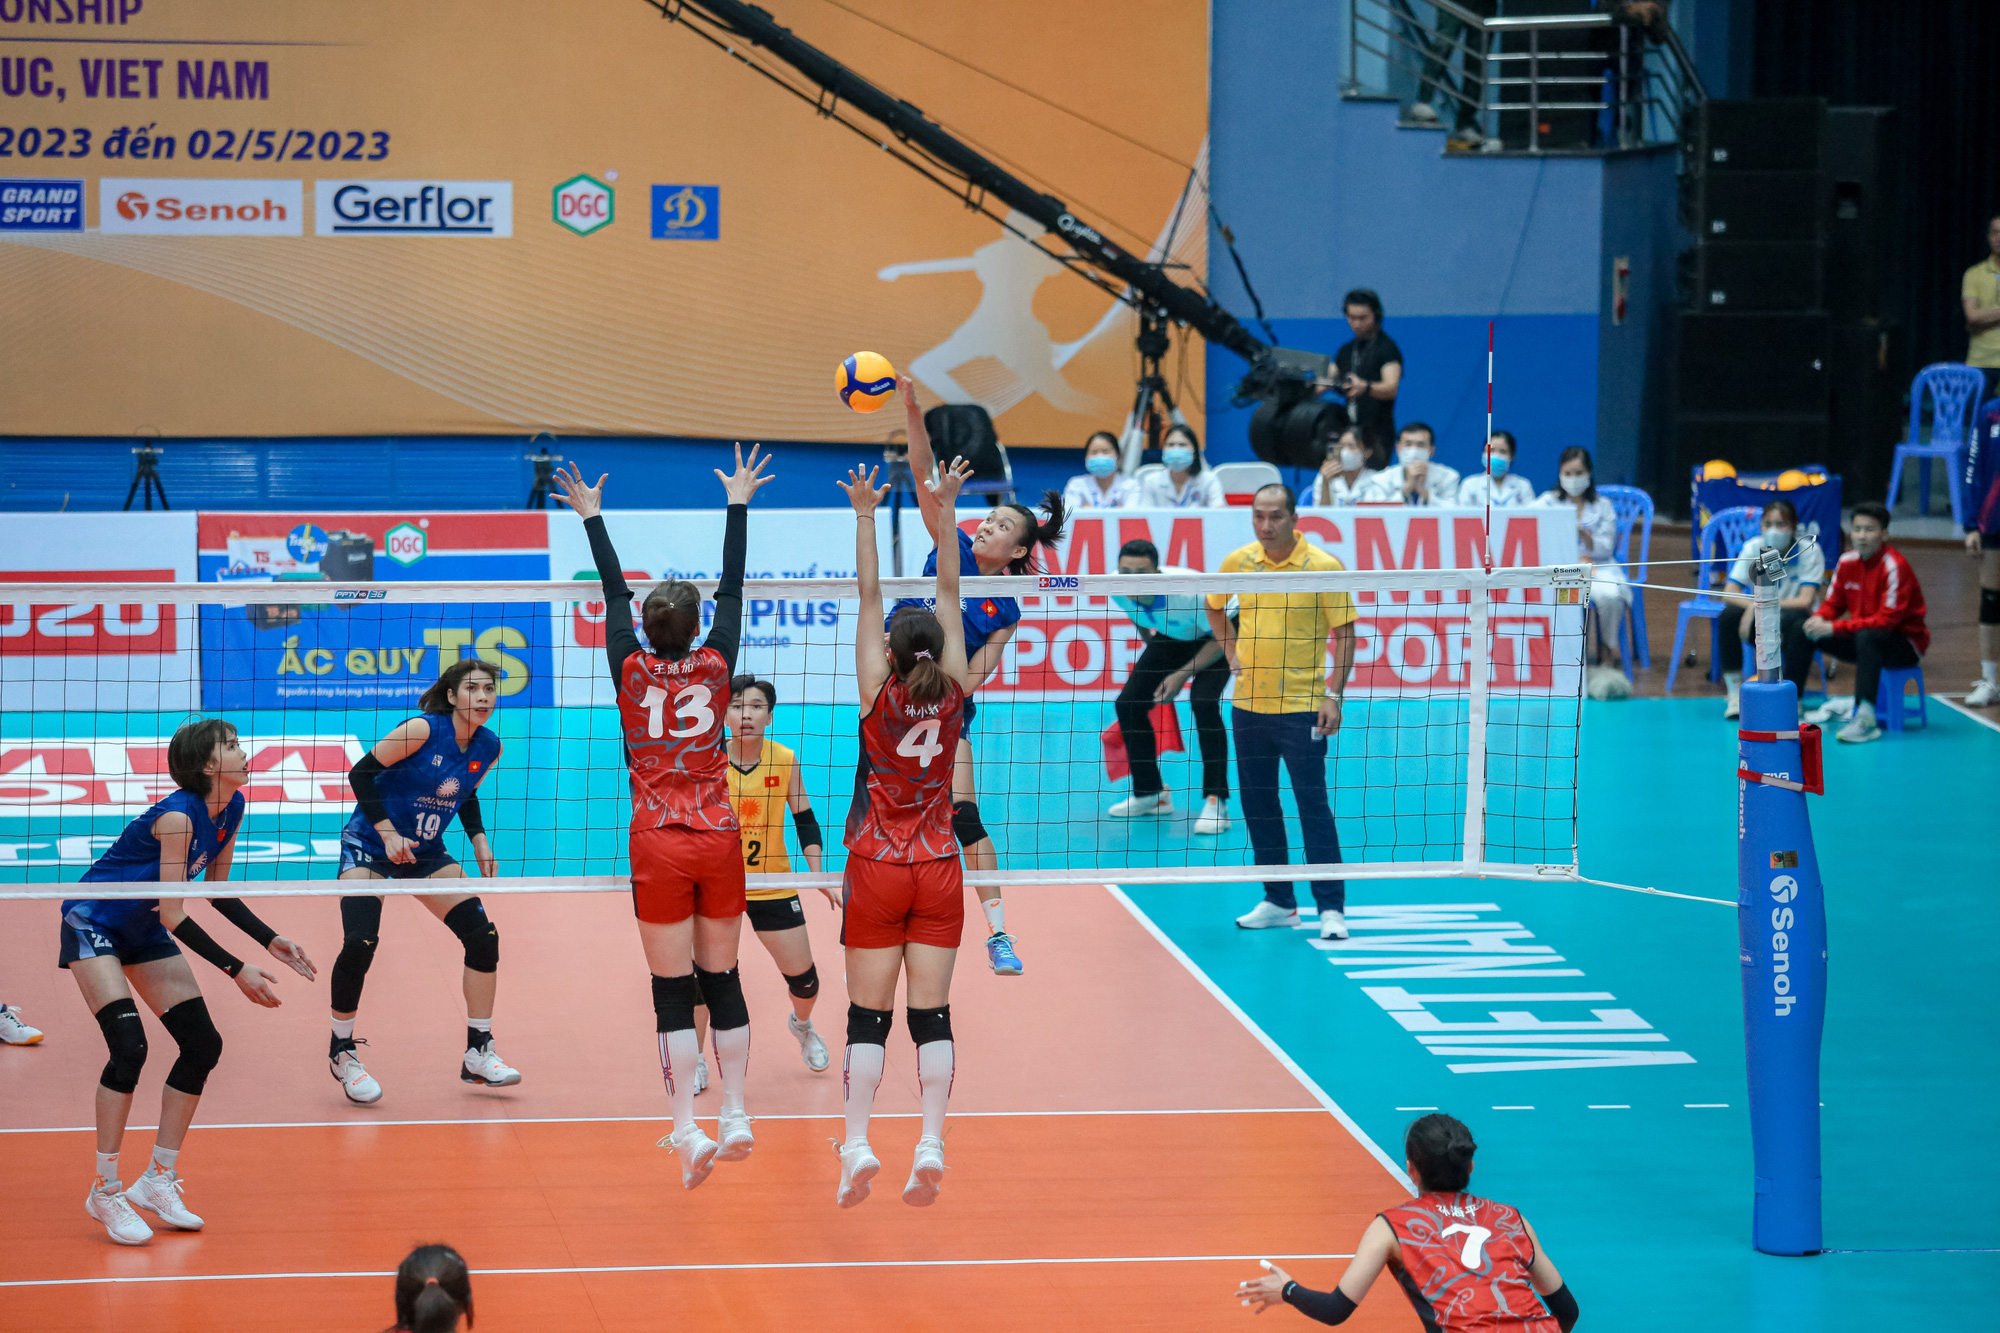 A Vietnam Sport Center I player jumps to spike the volleyball in their semifinal clash against China's Liaoning Donghua at the 2023 Asian Women's Club Volleyball Championship in Vinh Phuc Province, Vietnam, May 1, 2023. Photo: Asian Volleyball Confederation